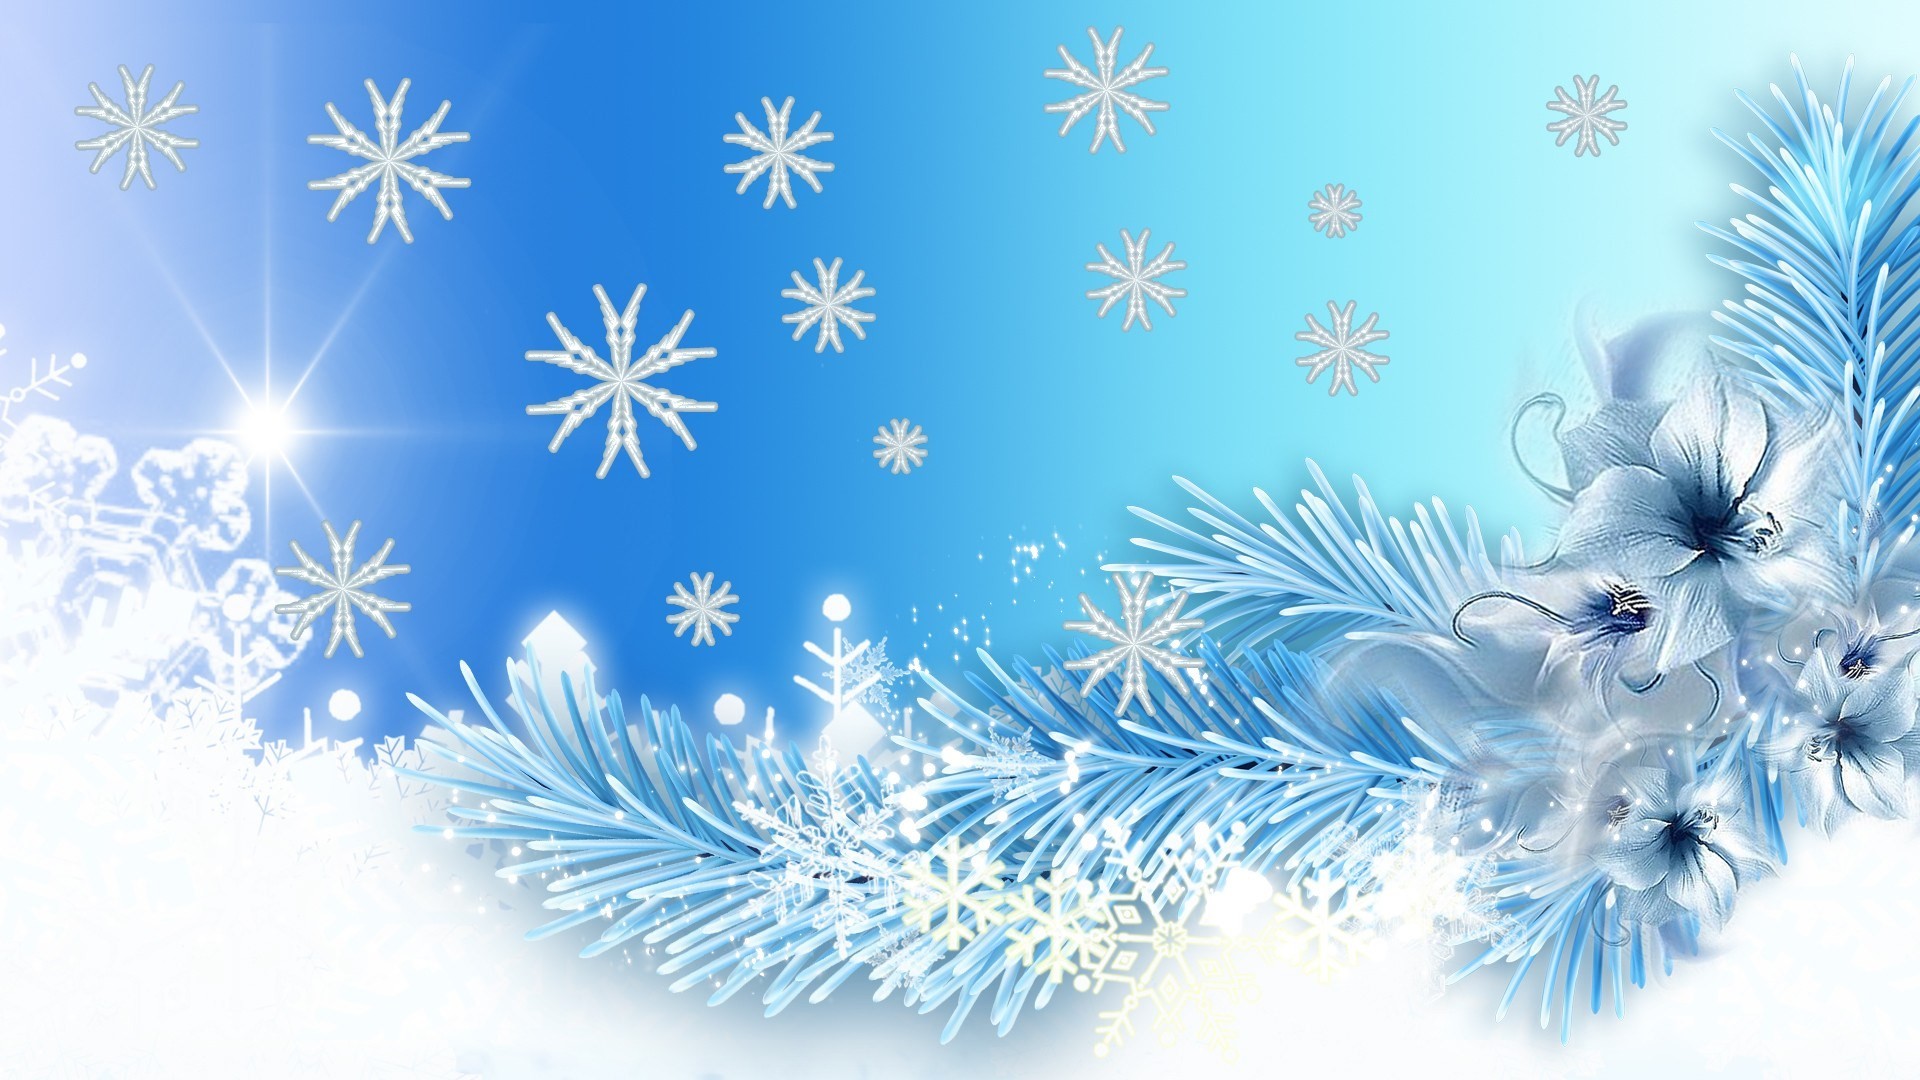 Winter theme background images – winter category